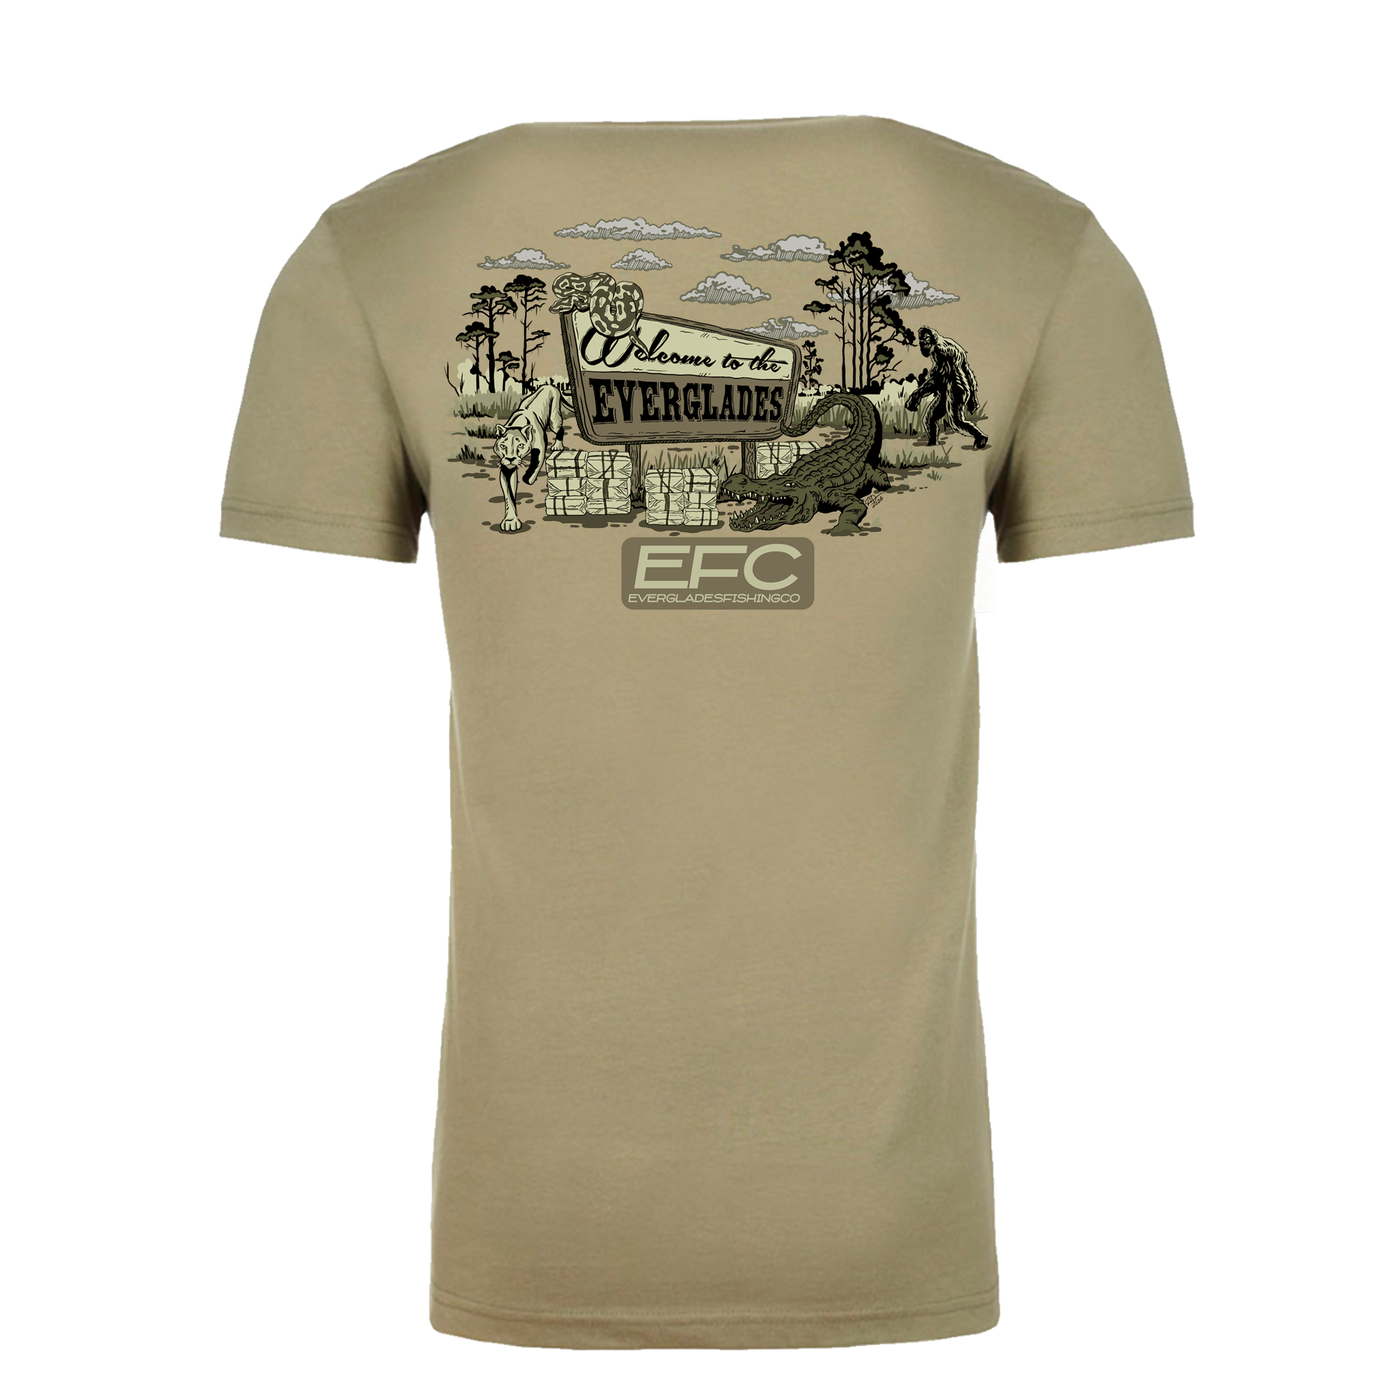 Welcome to Everglades Olive T-Shirt